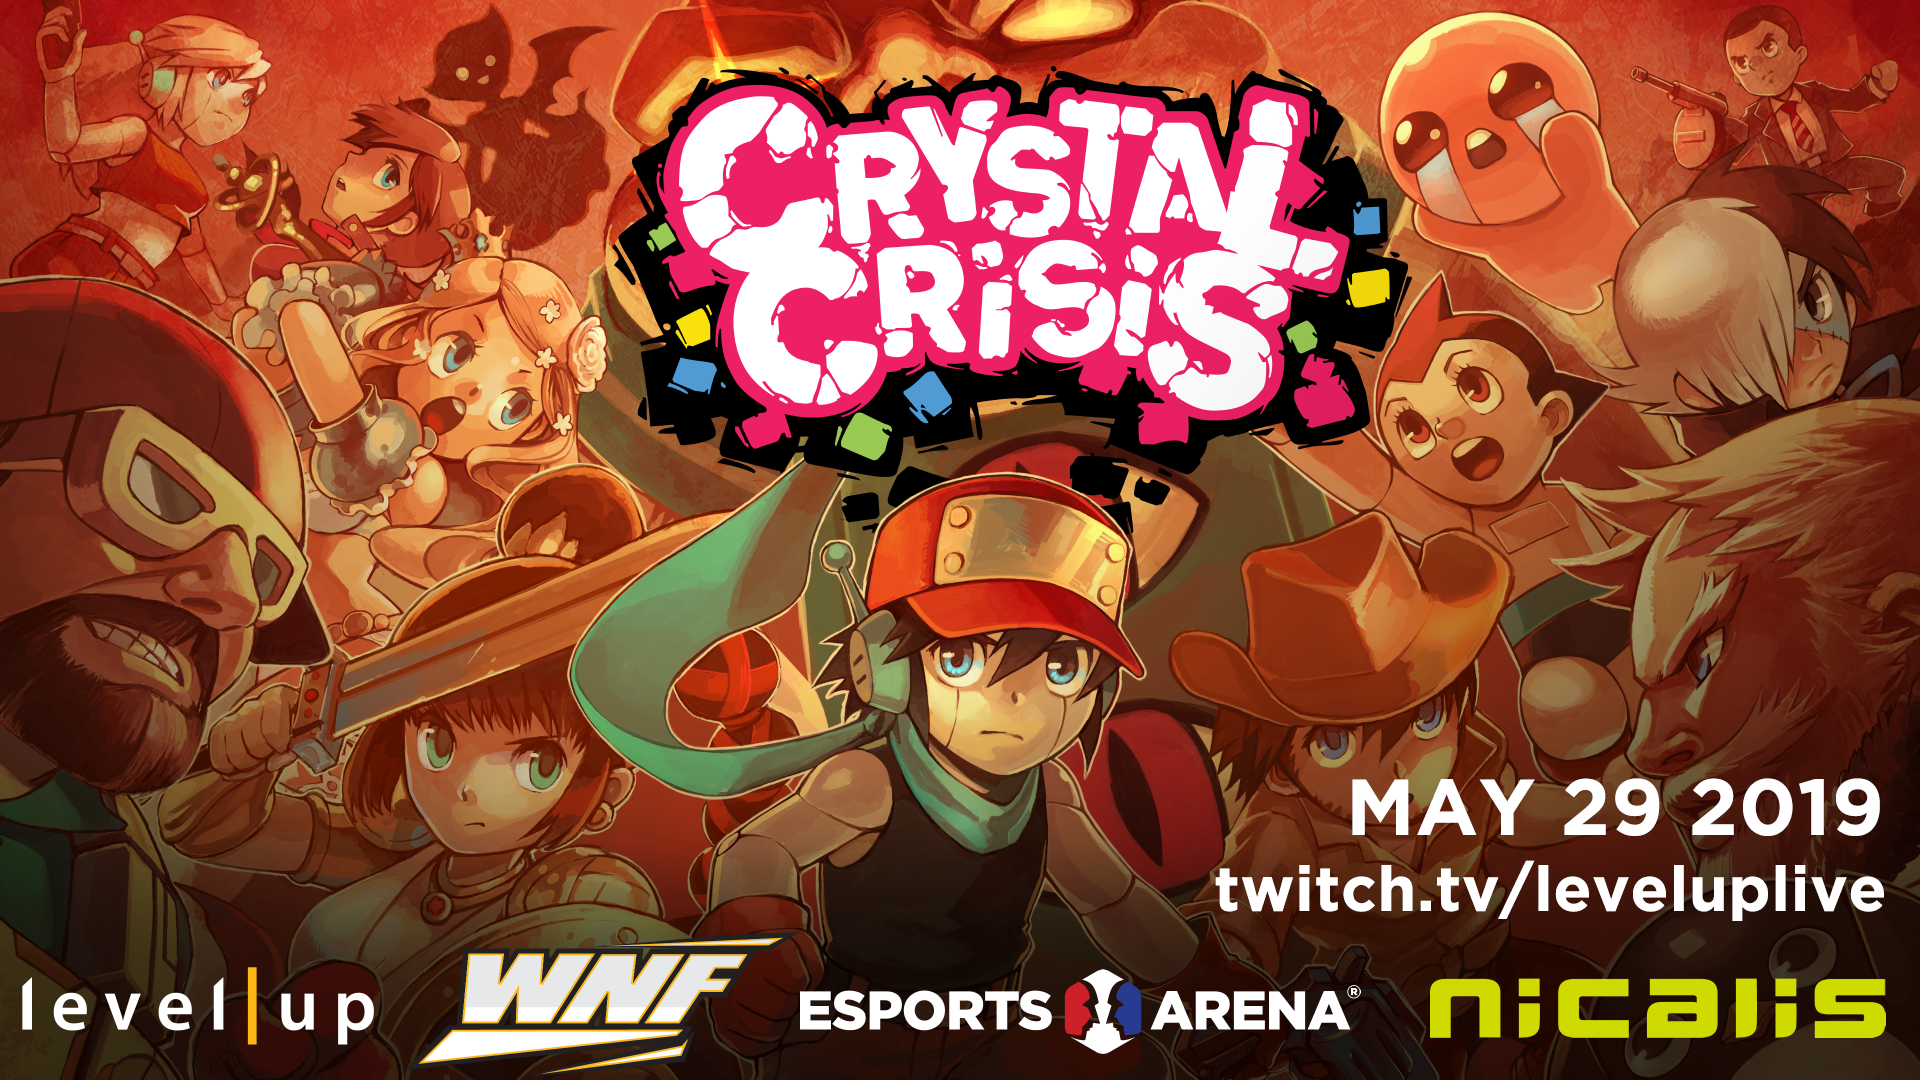 Weds Night Fights x Crystal Crisis